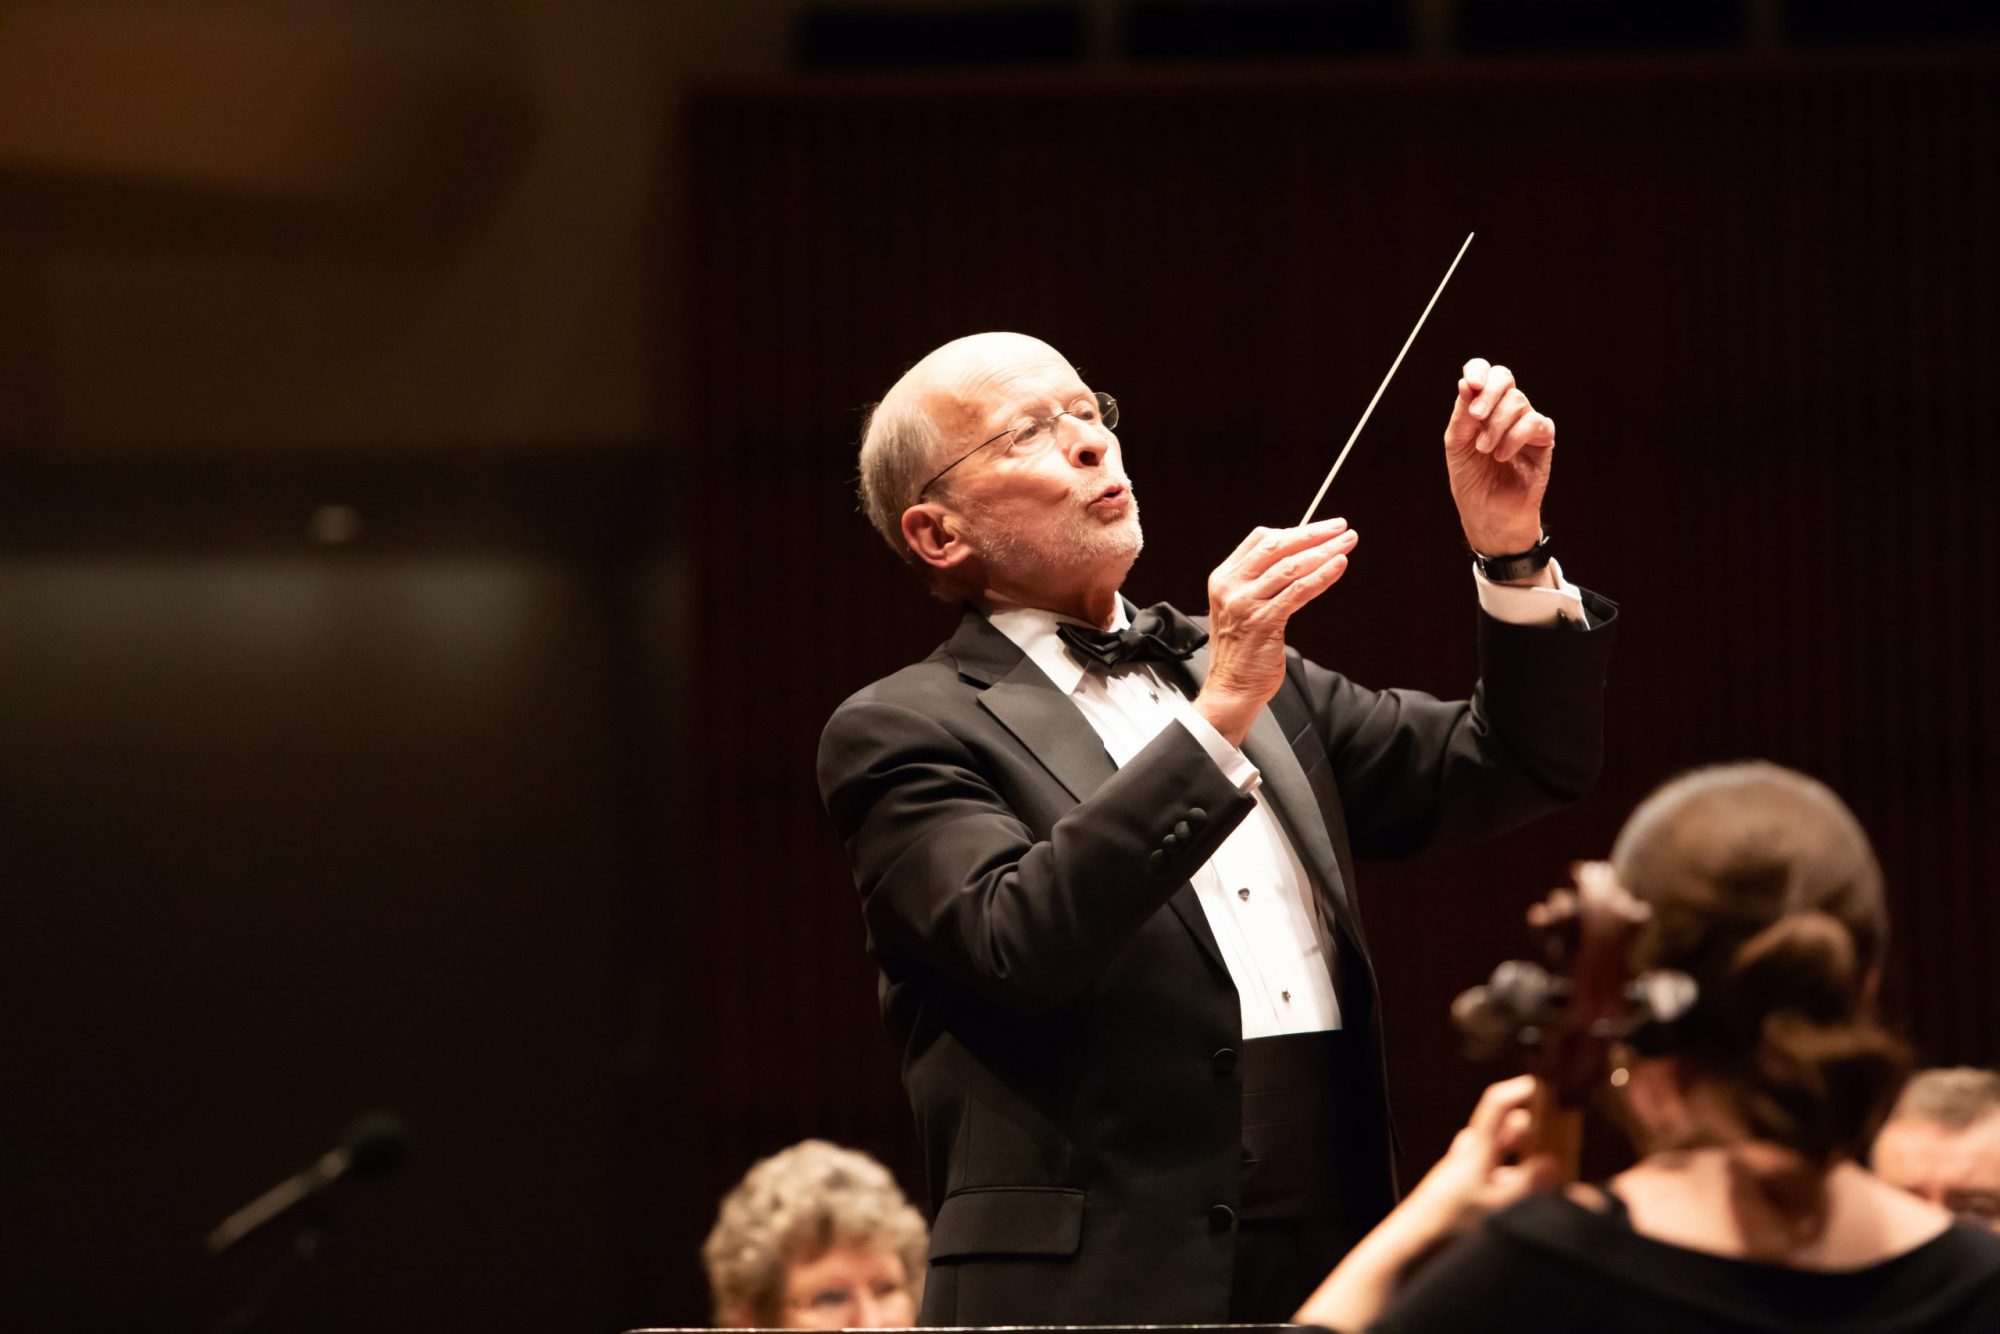 Philip Brunelle conducting Photo Credit: Katie Jeanne Photography